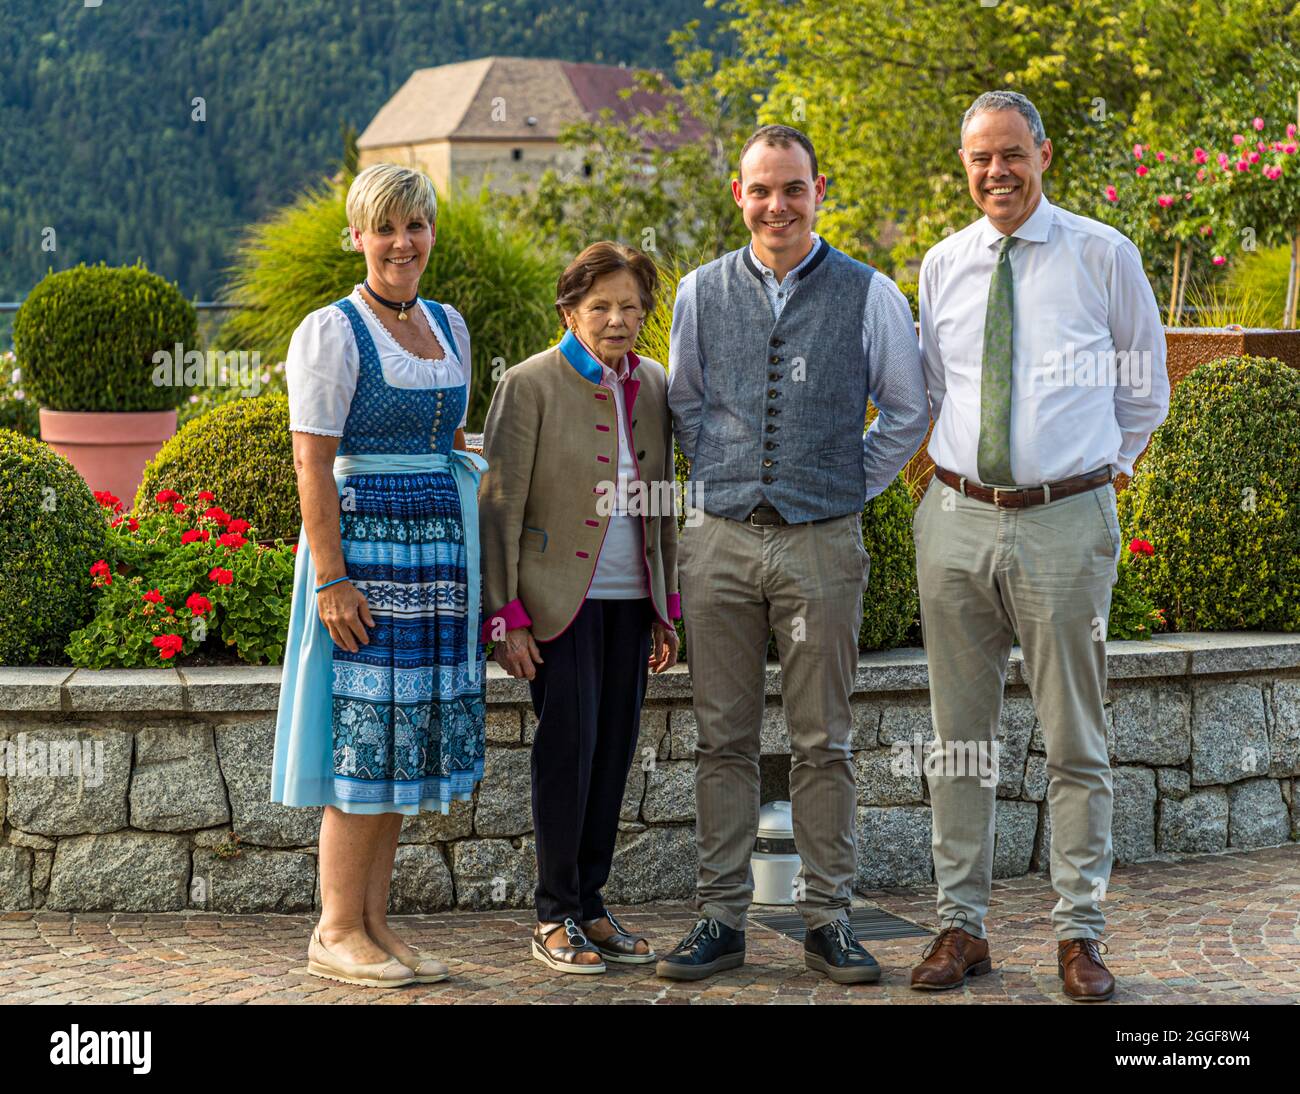 Three generations of the owner family Mair in front of the Hotel Hohenwart in Schenna, South Tyrol, Italy. Anna Mair, together with her late husband Franz Mair, built up the hotel in the 1960s. Today the management is in the hands of son Josef Mair with his wife. Grandson Franz Mair can be found in the service and he leads hikes for house guests Stock Photo